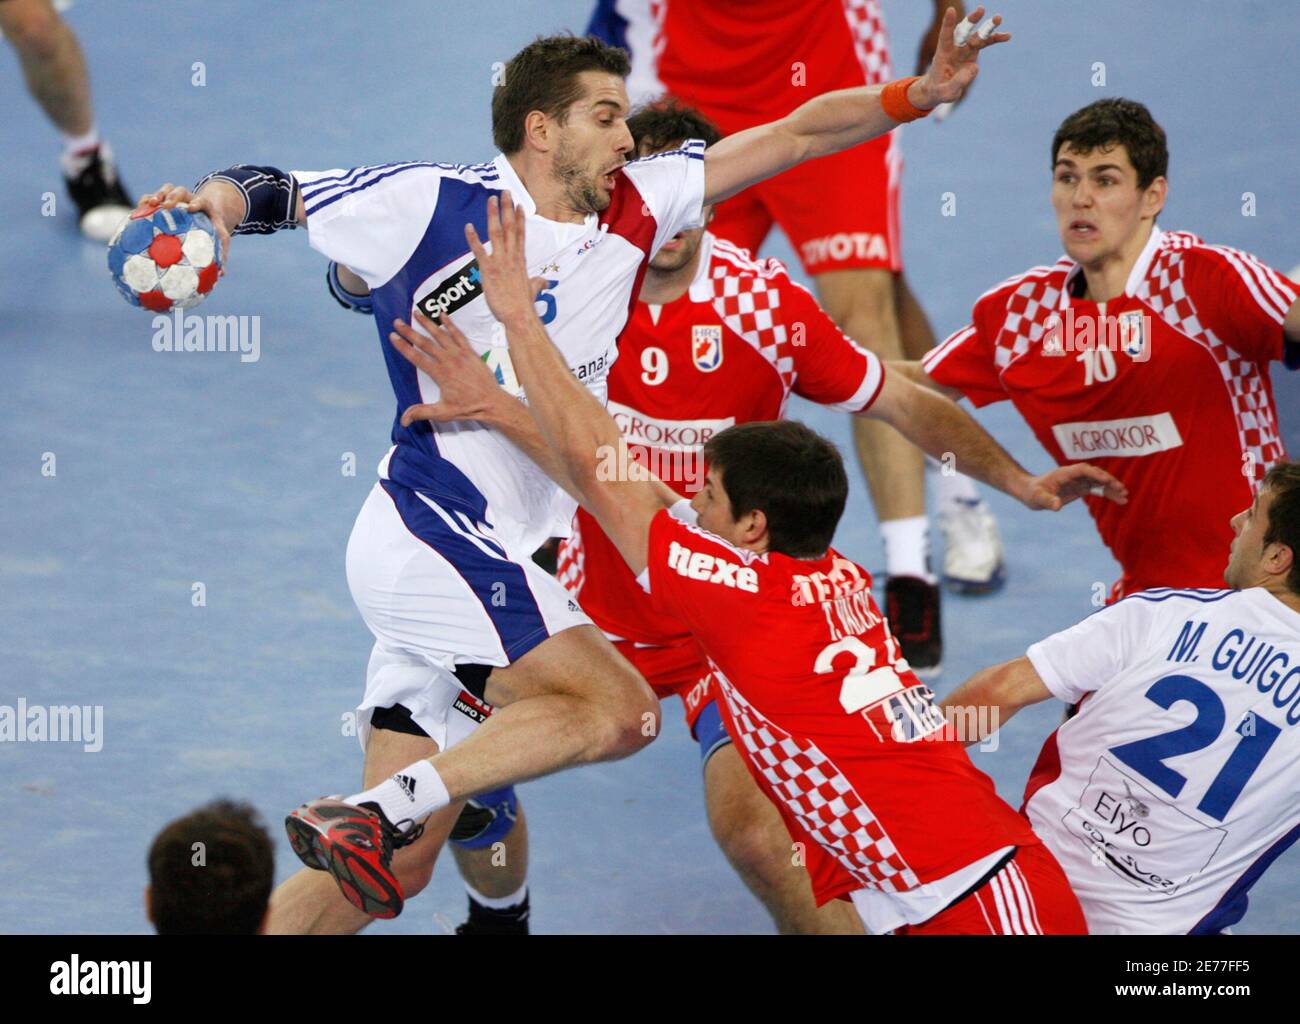 France's Guillaume Gille (L) tries to shoot past Croatia's players during  their Men's World Handball Championship gold medal match in Zagreb February  1, 2009. REUTERS/Marko Djurica (CROATIA Stock Photo - Alamy